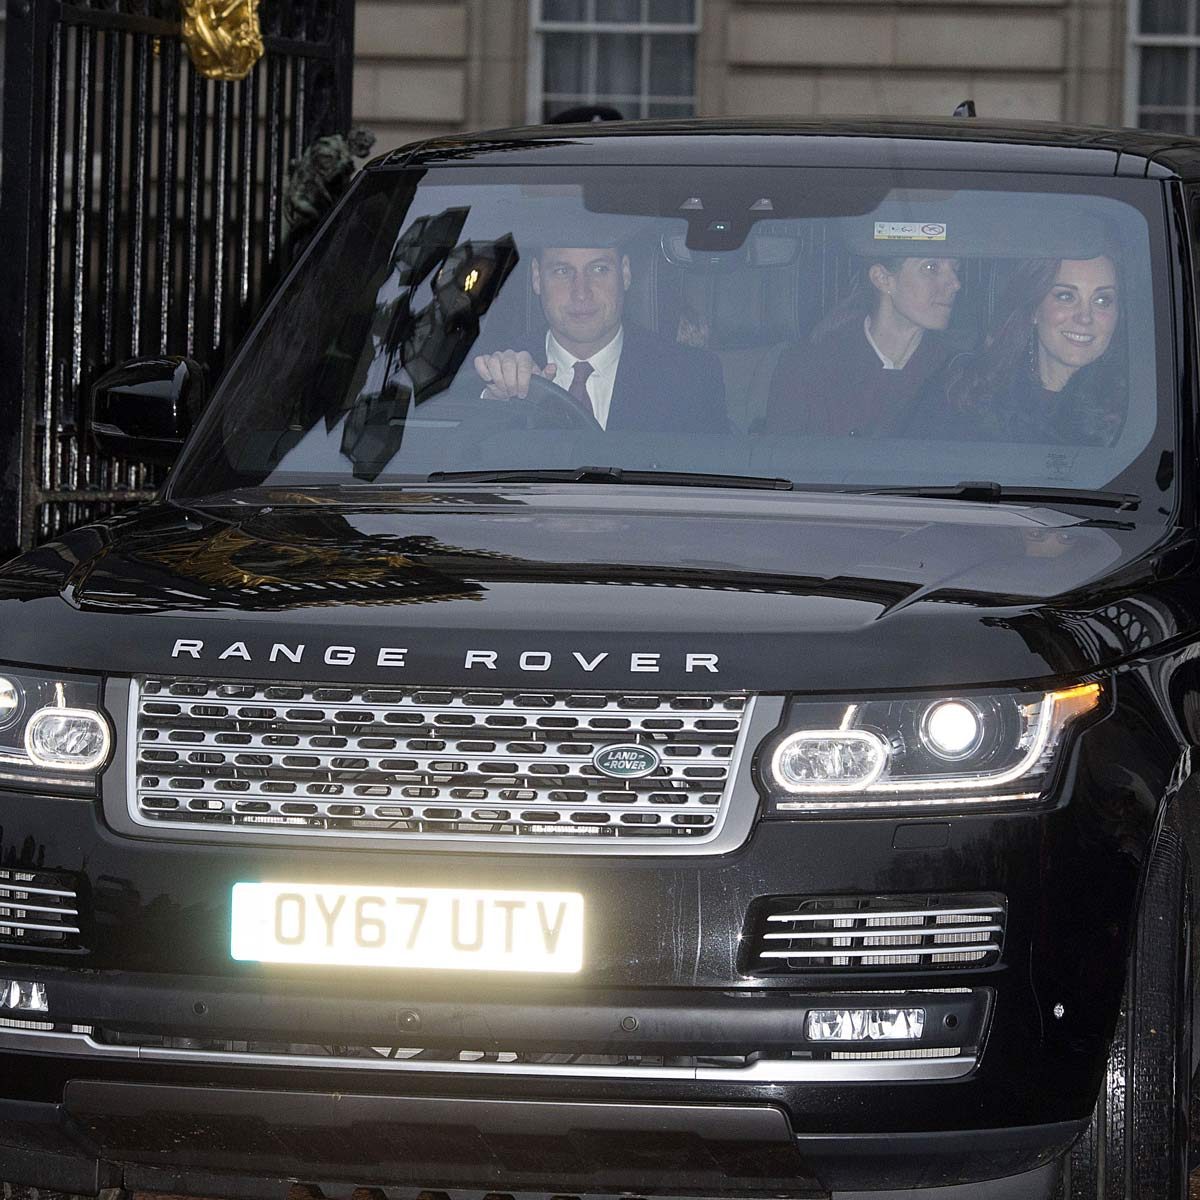 Prince William and Catherine Duchess of Cambridge drive in a black Range Rover